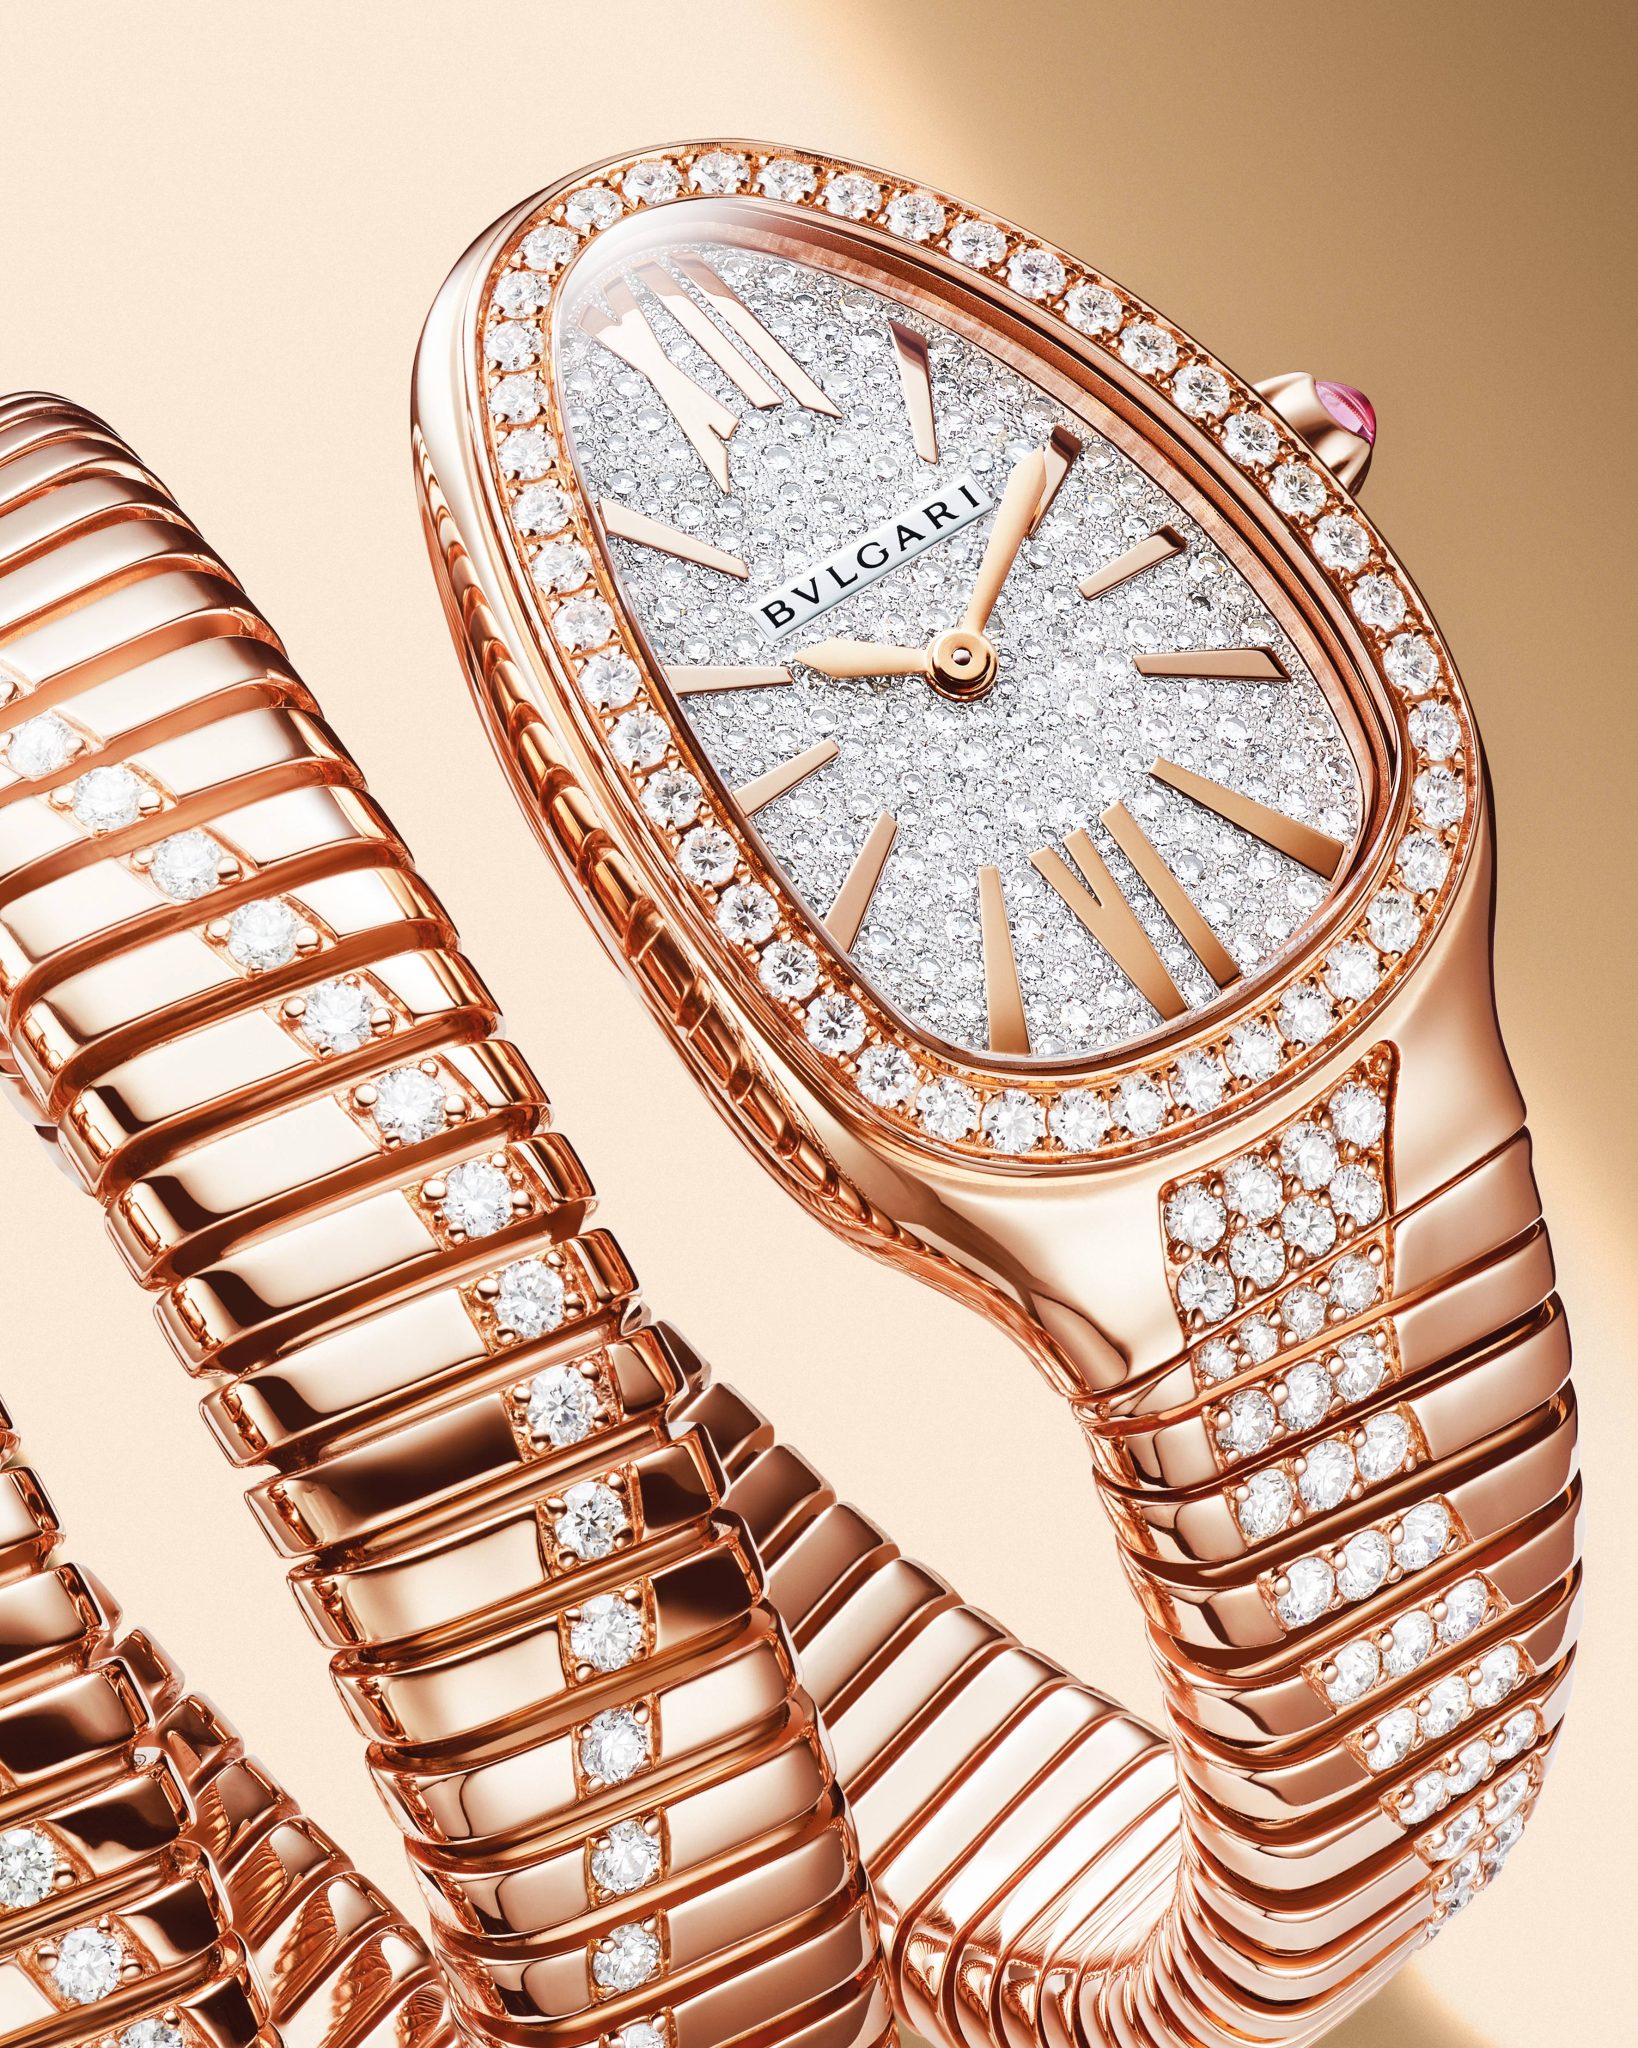 The most exciting new watches from LVMH Watch Week